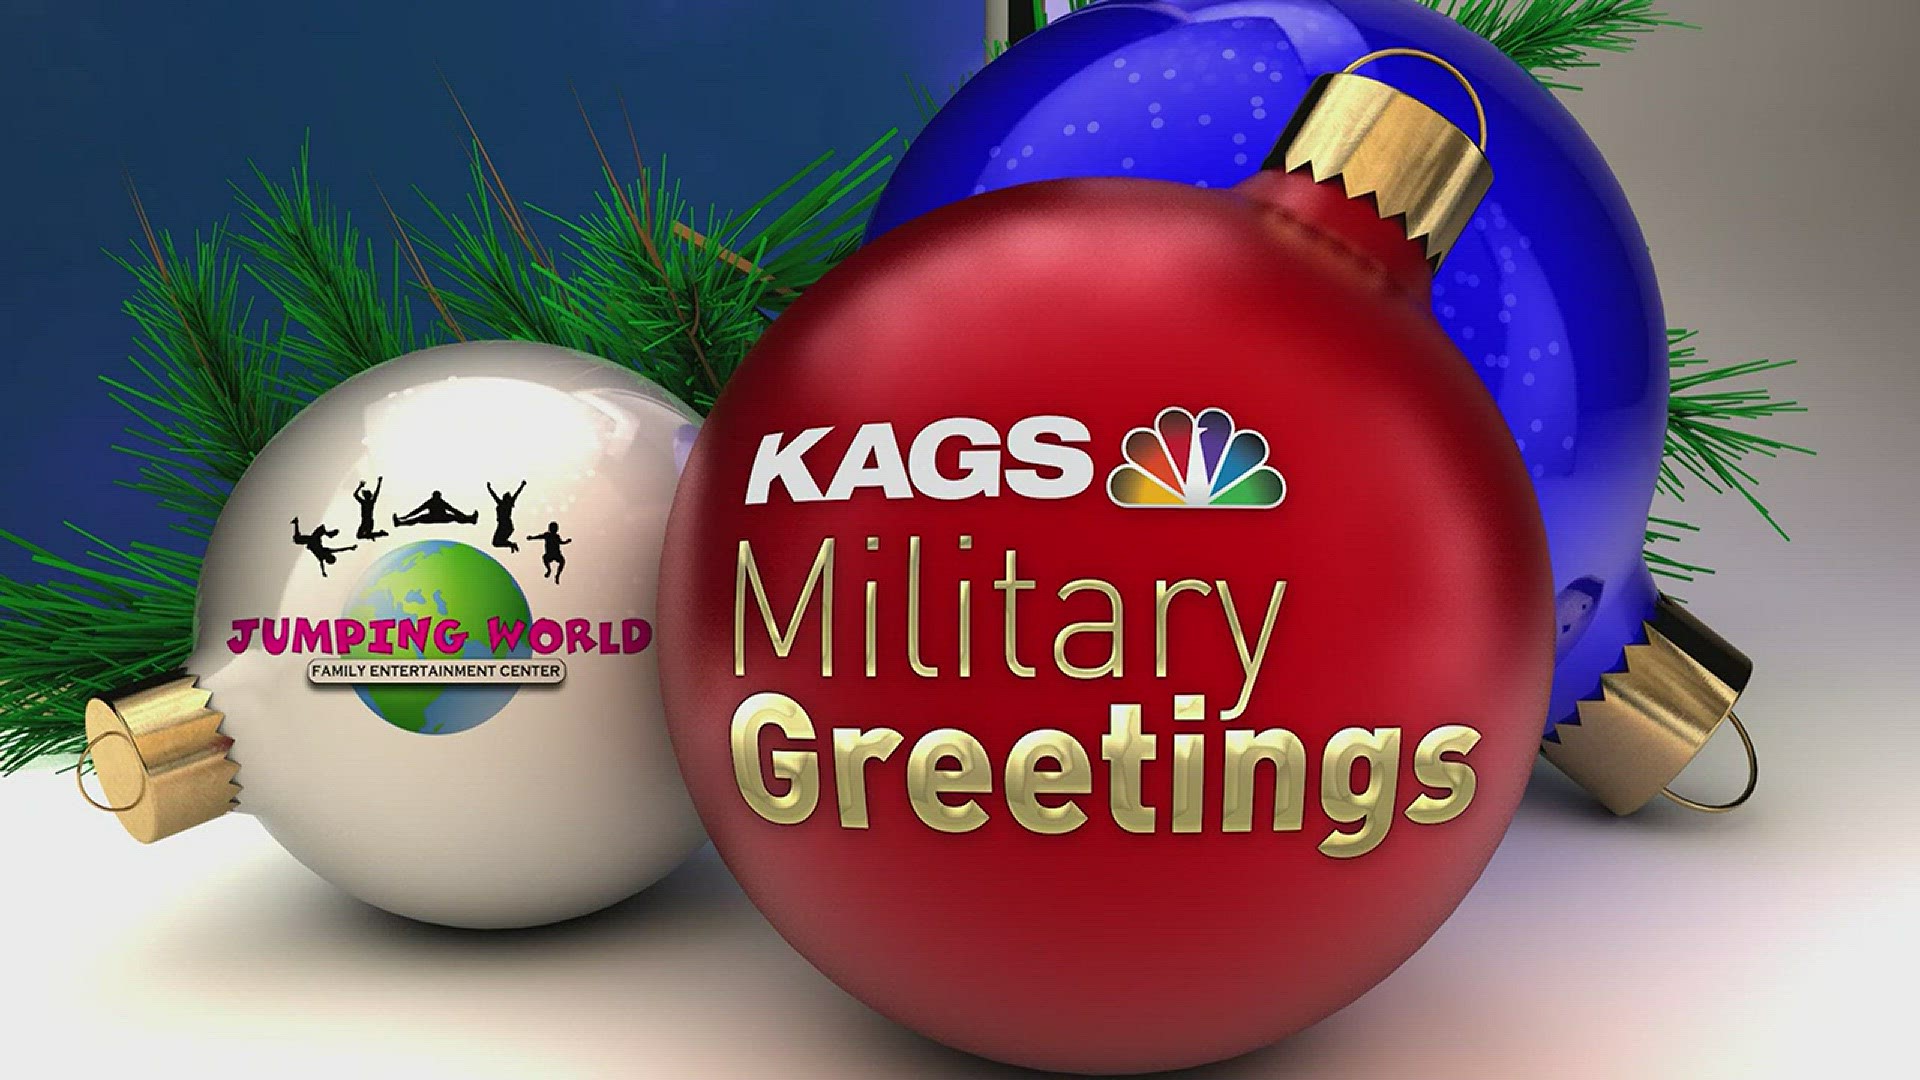 Jumping World presents Military greetings from SSGT Alma Jackson and LCDR Juan Hernandez